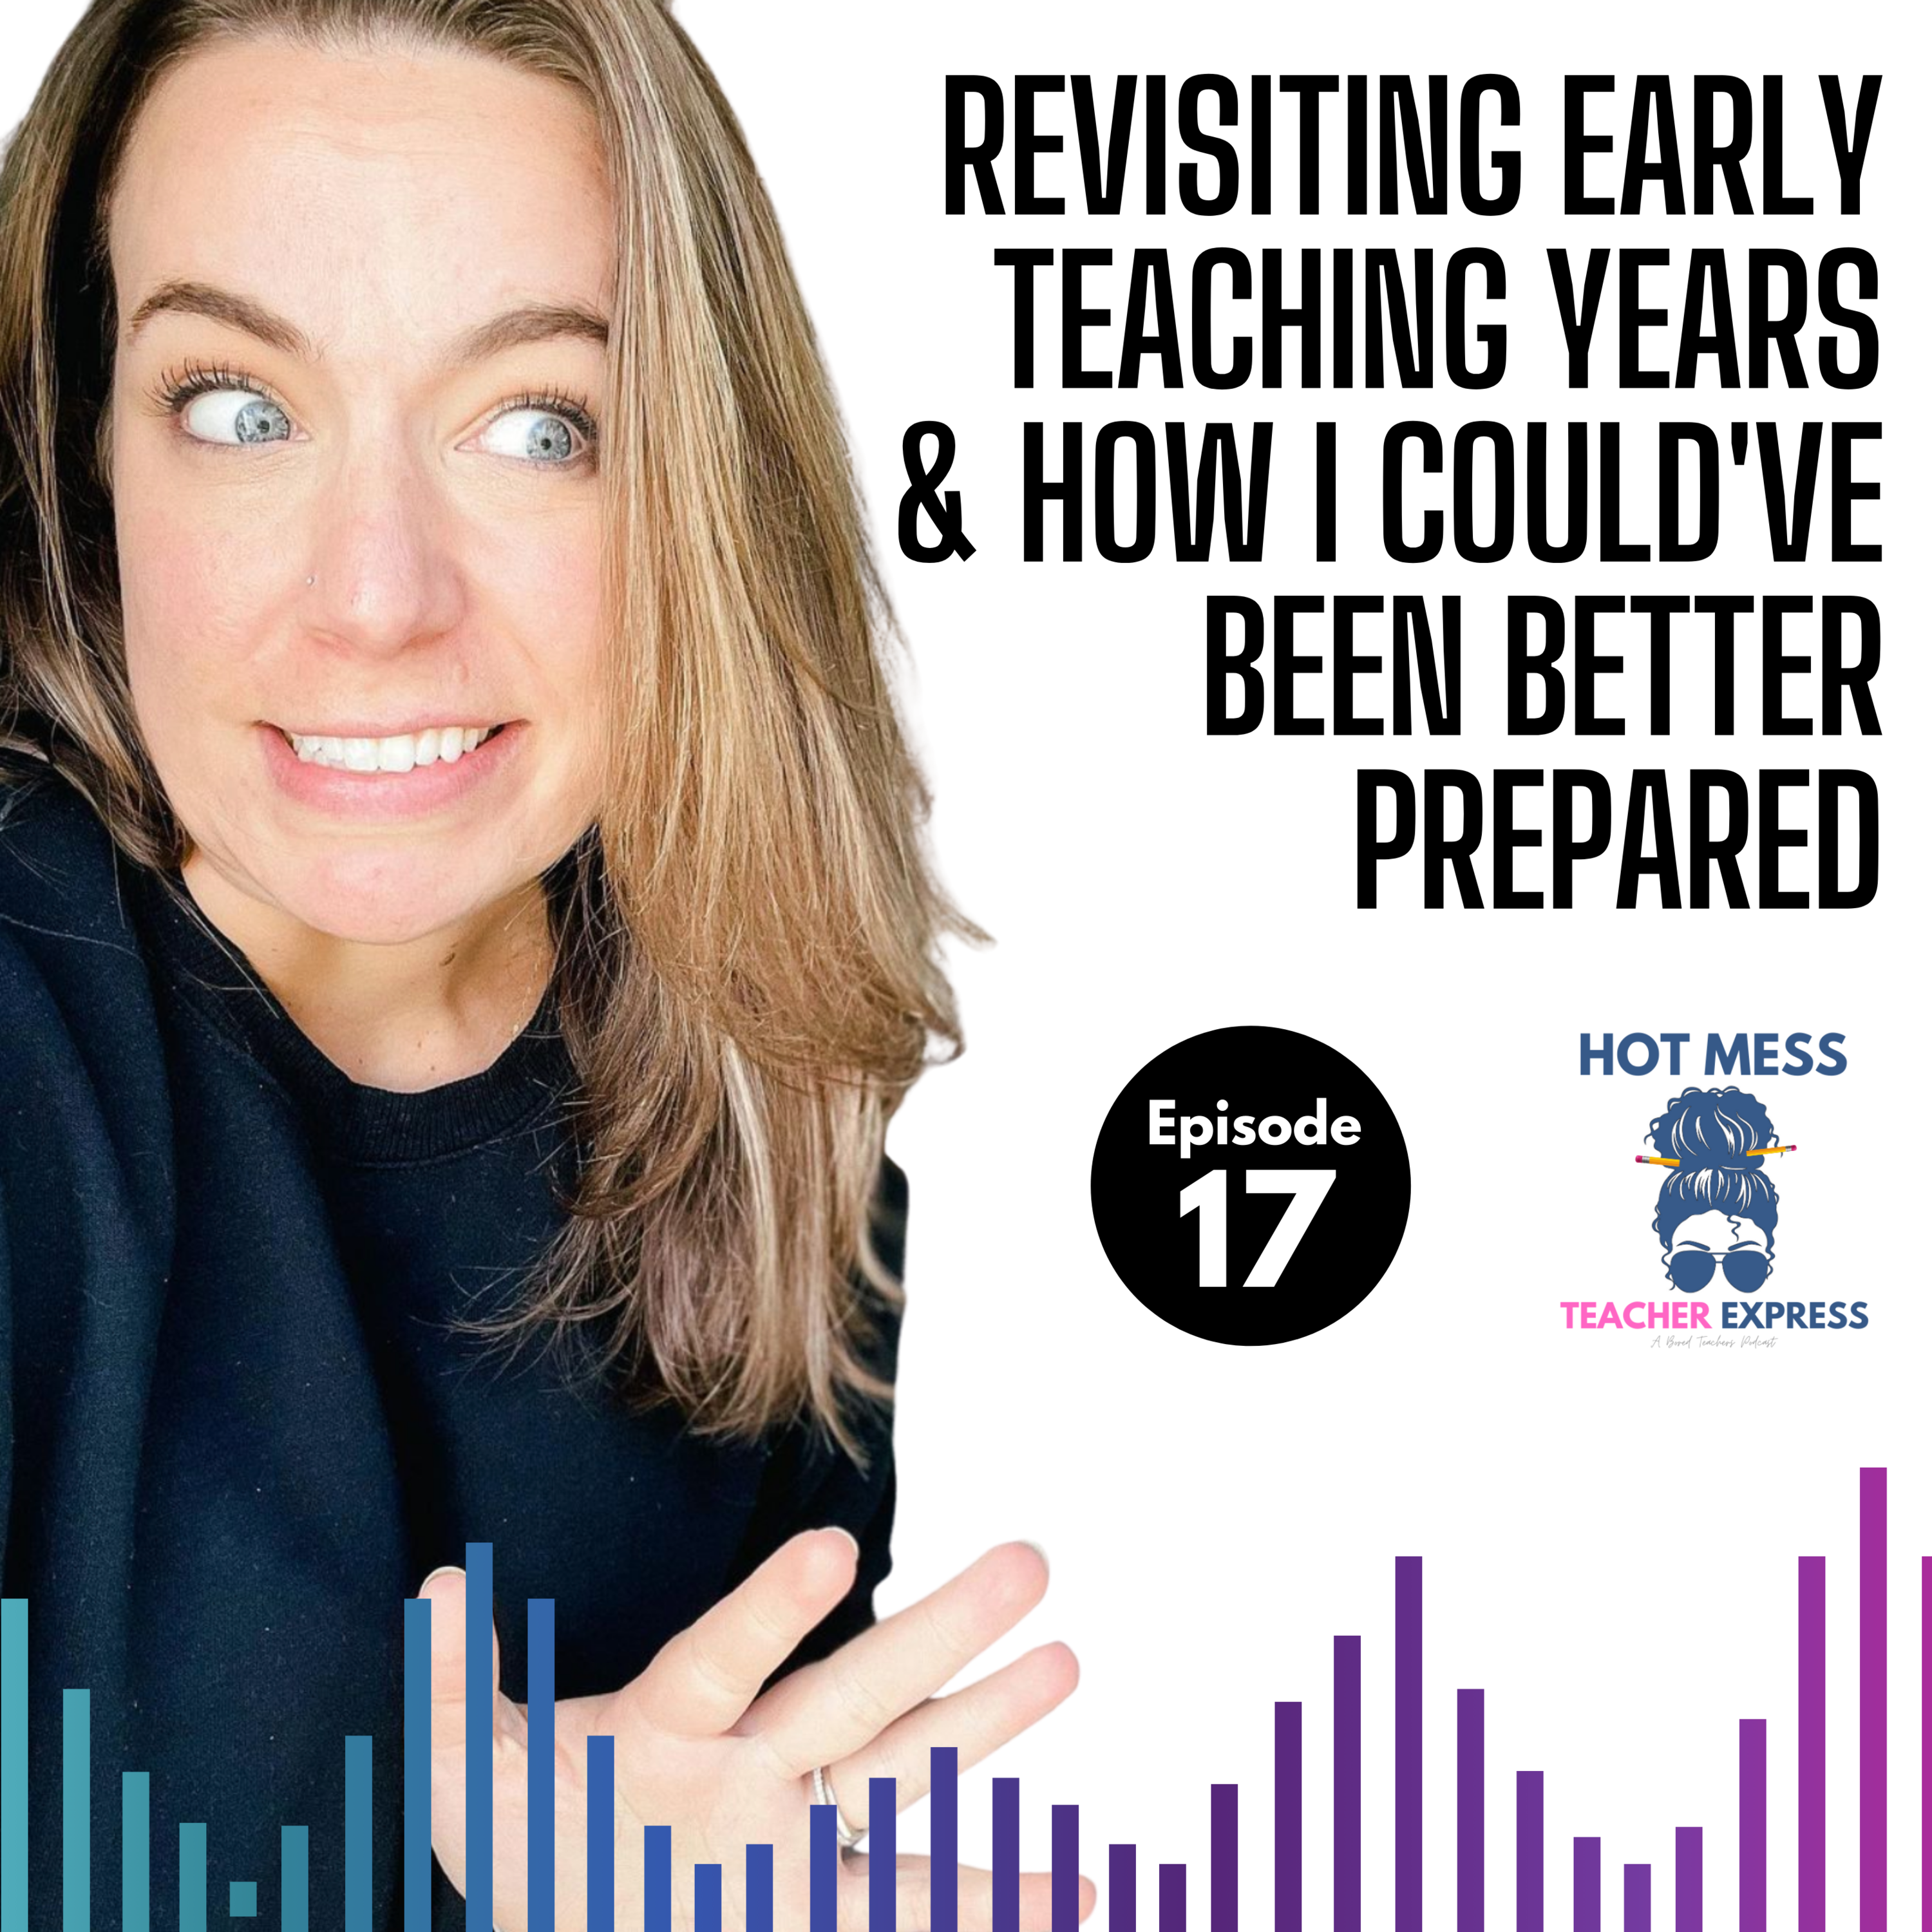 Episode #17 - Revisiting Our Early Teaching Careers & Preventing Teacher Burnout